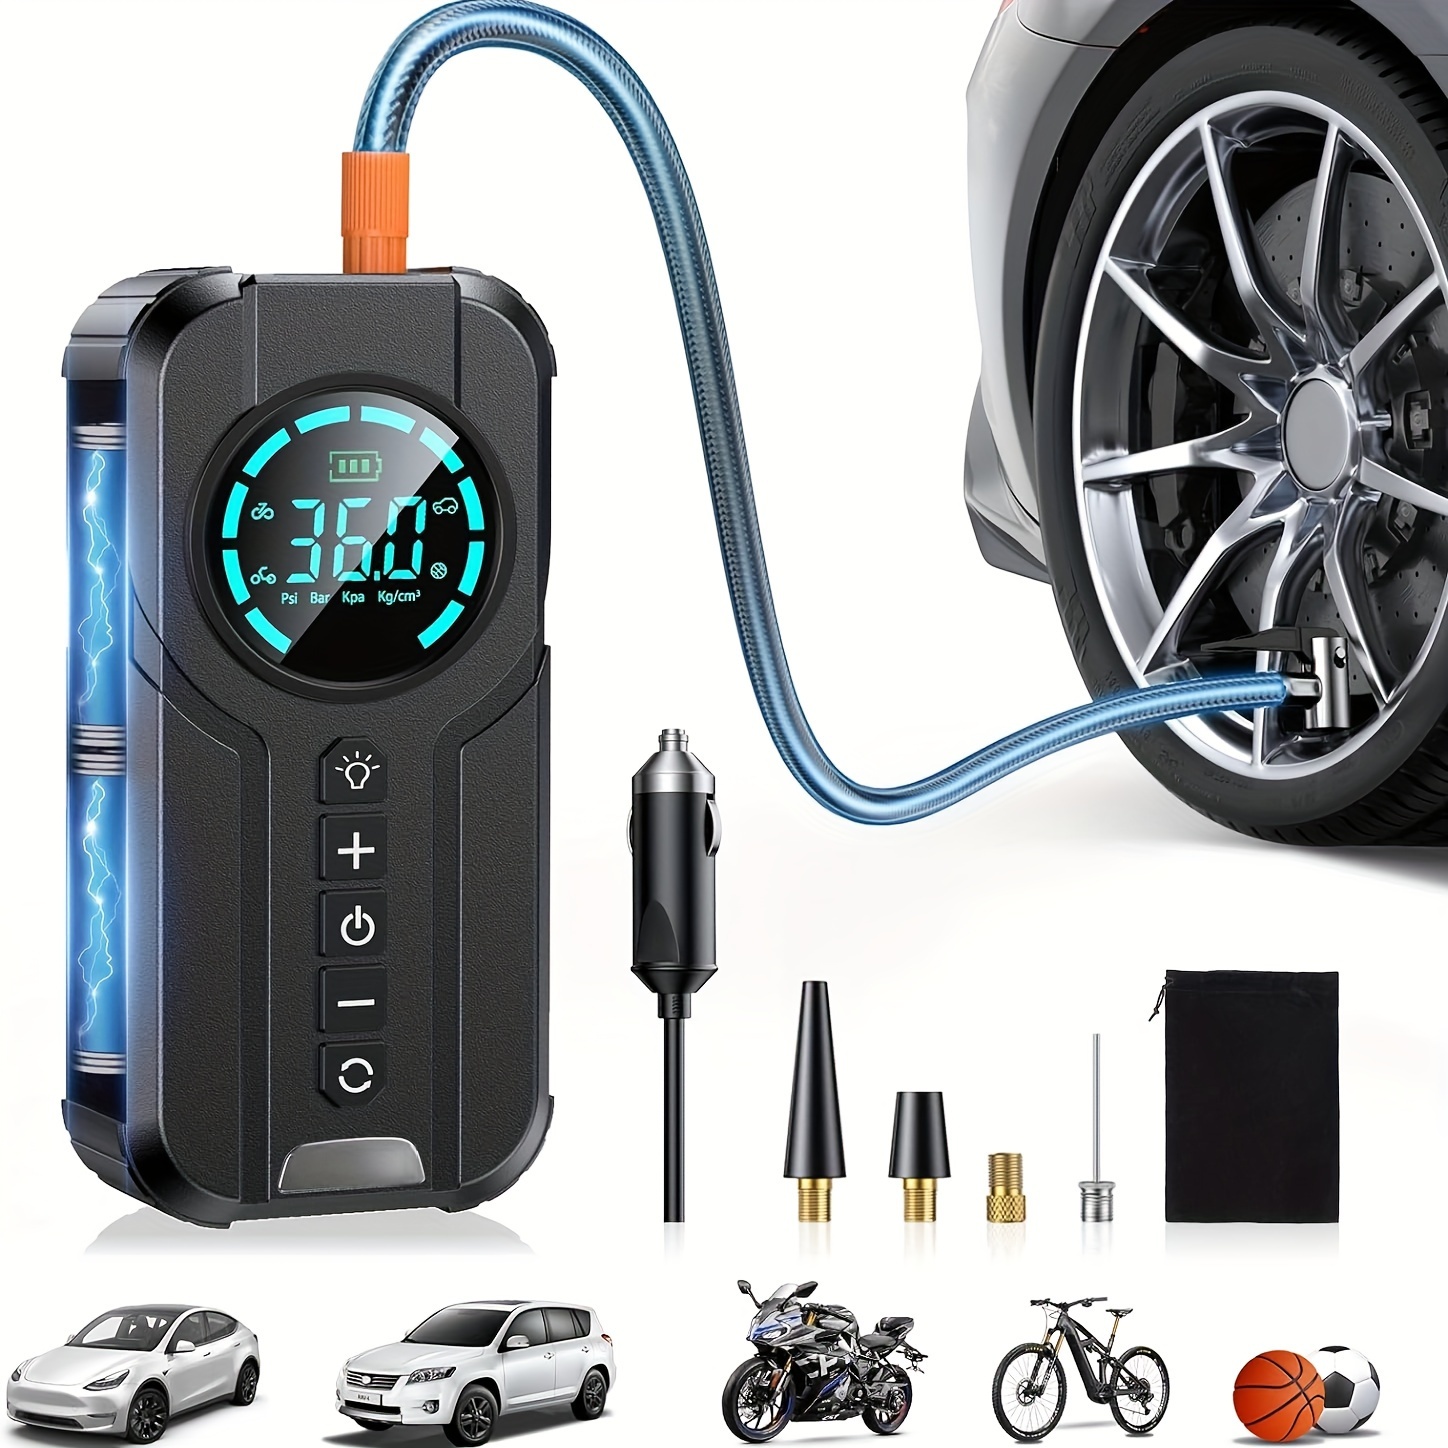 

Cordless Portable Air Compressor, 12v High Power Tire Inflator Pump, 150psi Car Tire Inflator, Suitable For Motorcycle, Bicycles, Balls, Inflatable Mattresses, Swimming Ring